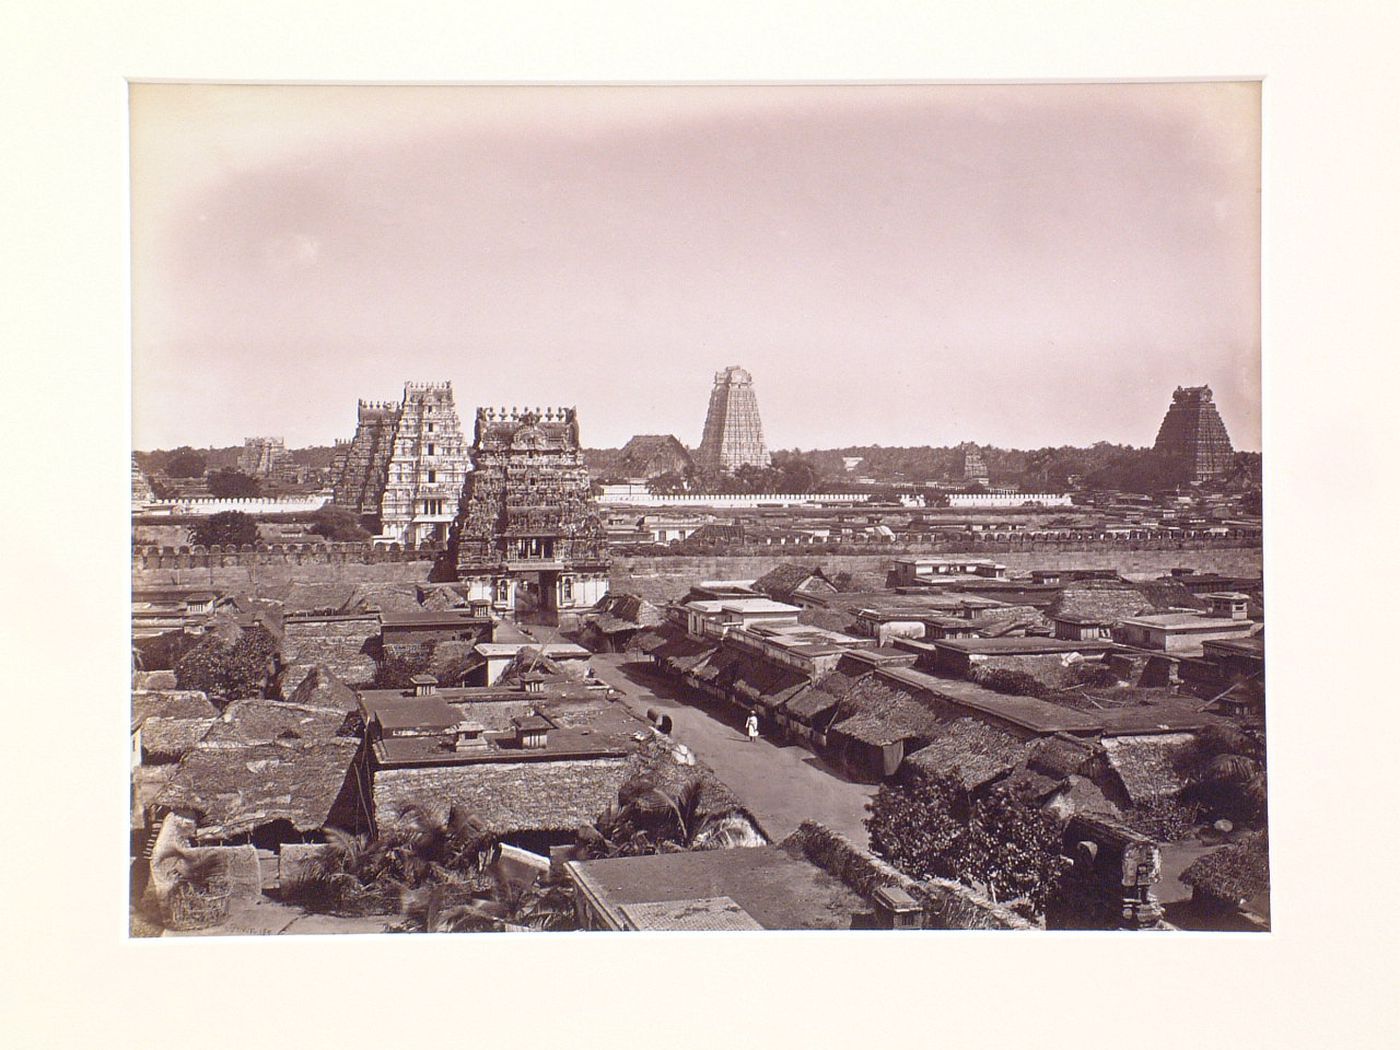 View of Sri Ranganatha Temple complex with dwellings in the foreground, Seringham (now Srirangam), India